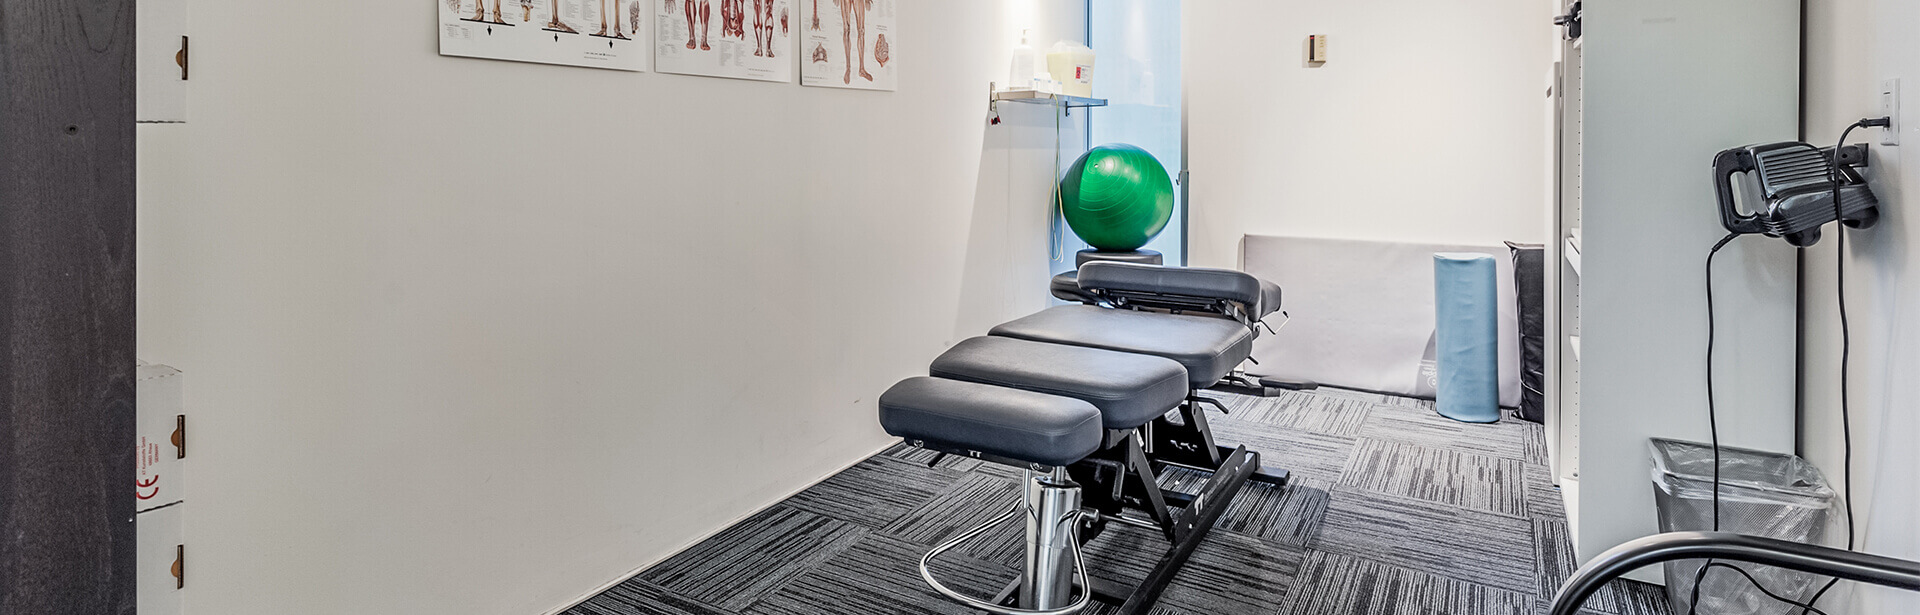 Physiotherapy Treatment Table & Assessment Room | Dundas University Health Clinic